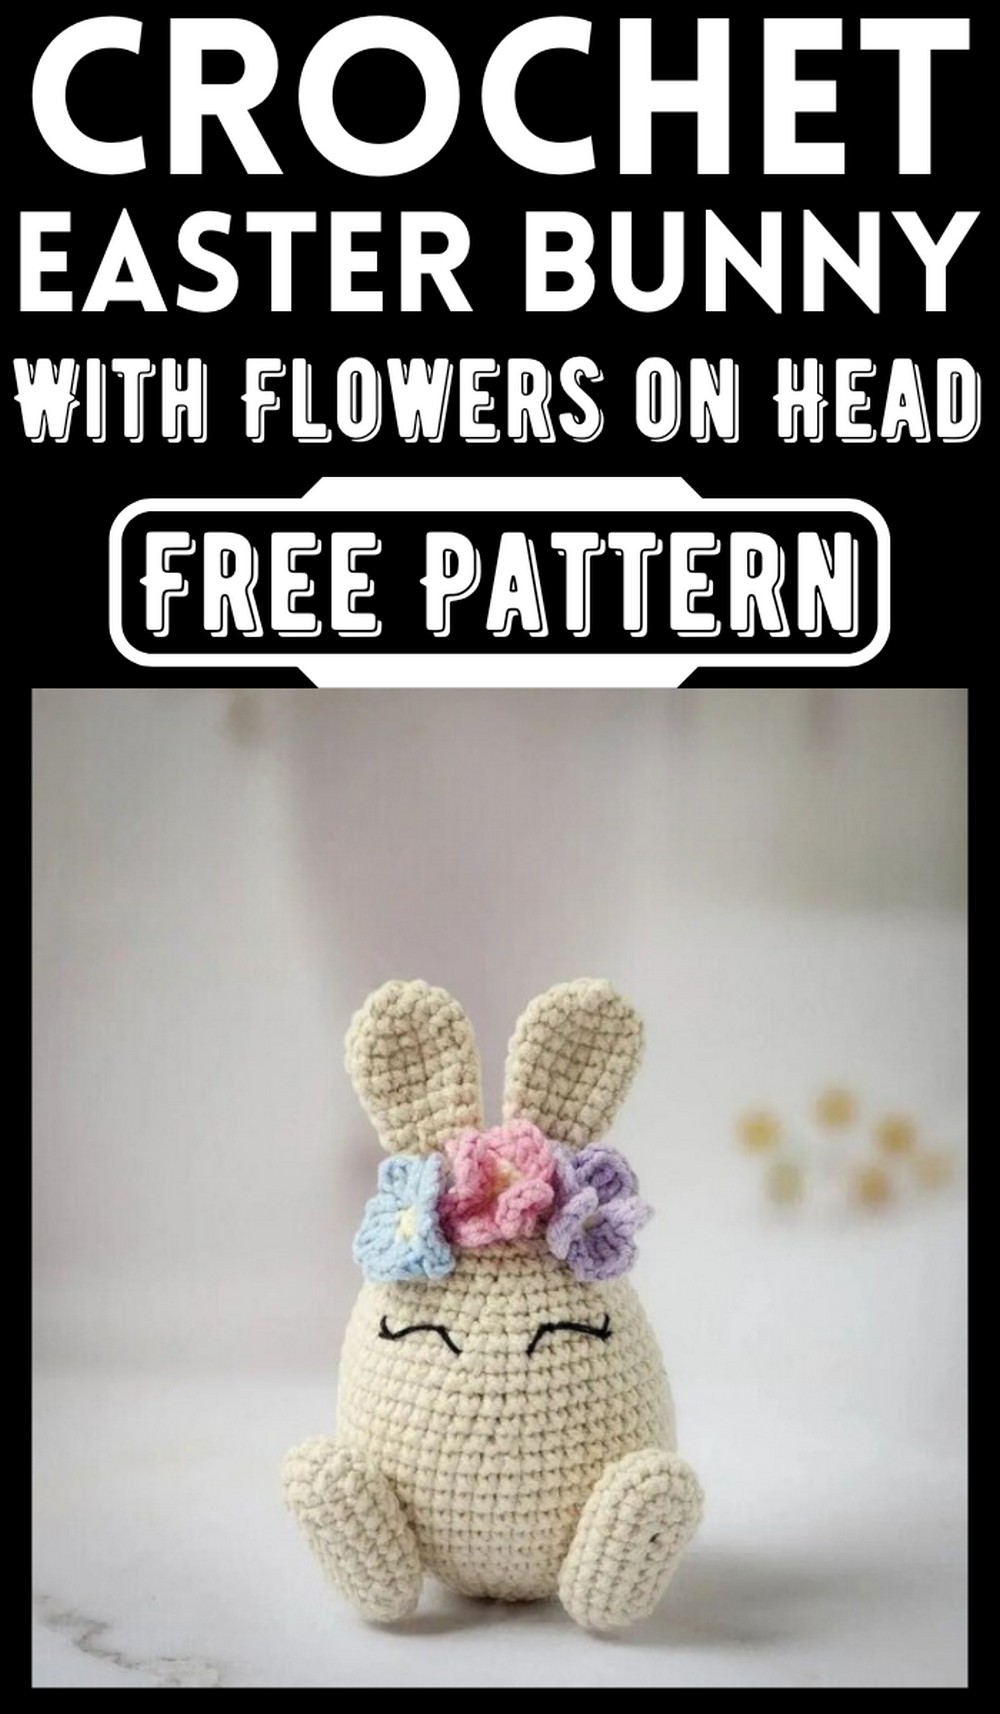 Free Crochet Easter Bunny With Flowers on Head Pattern